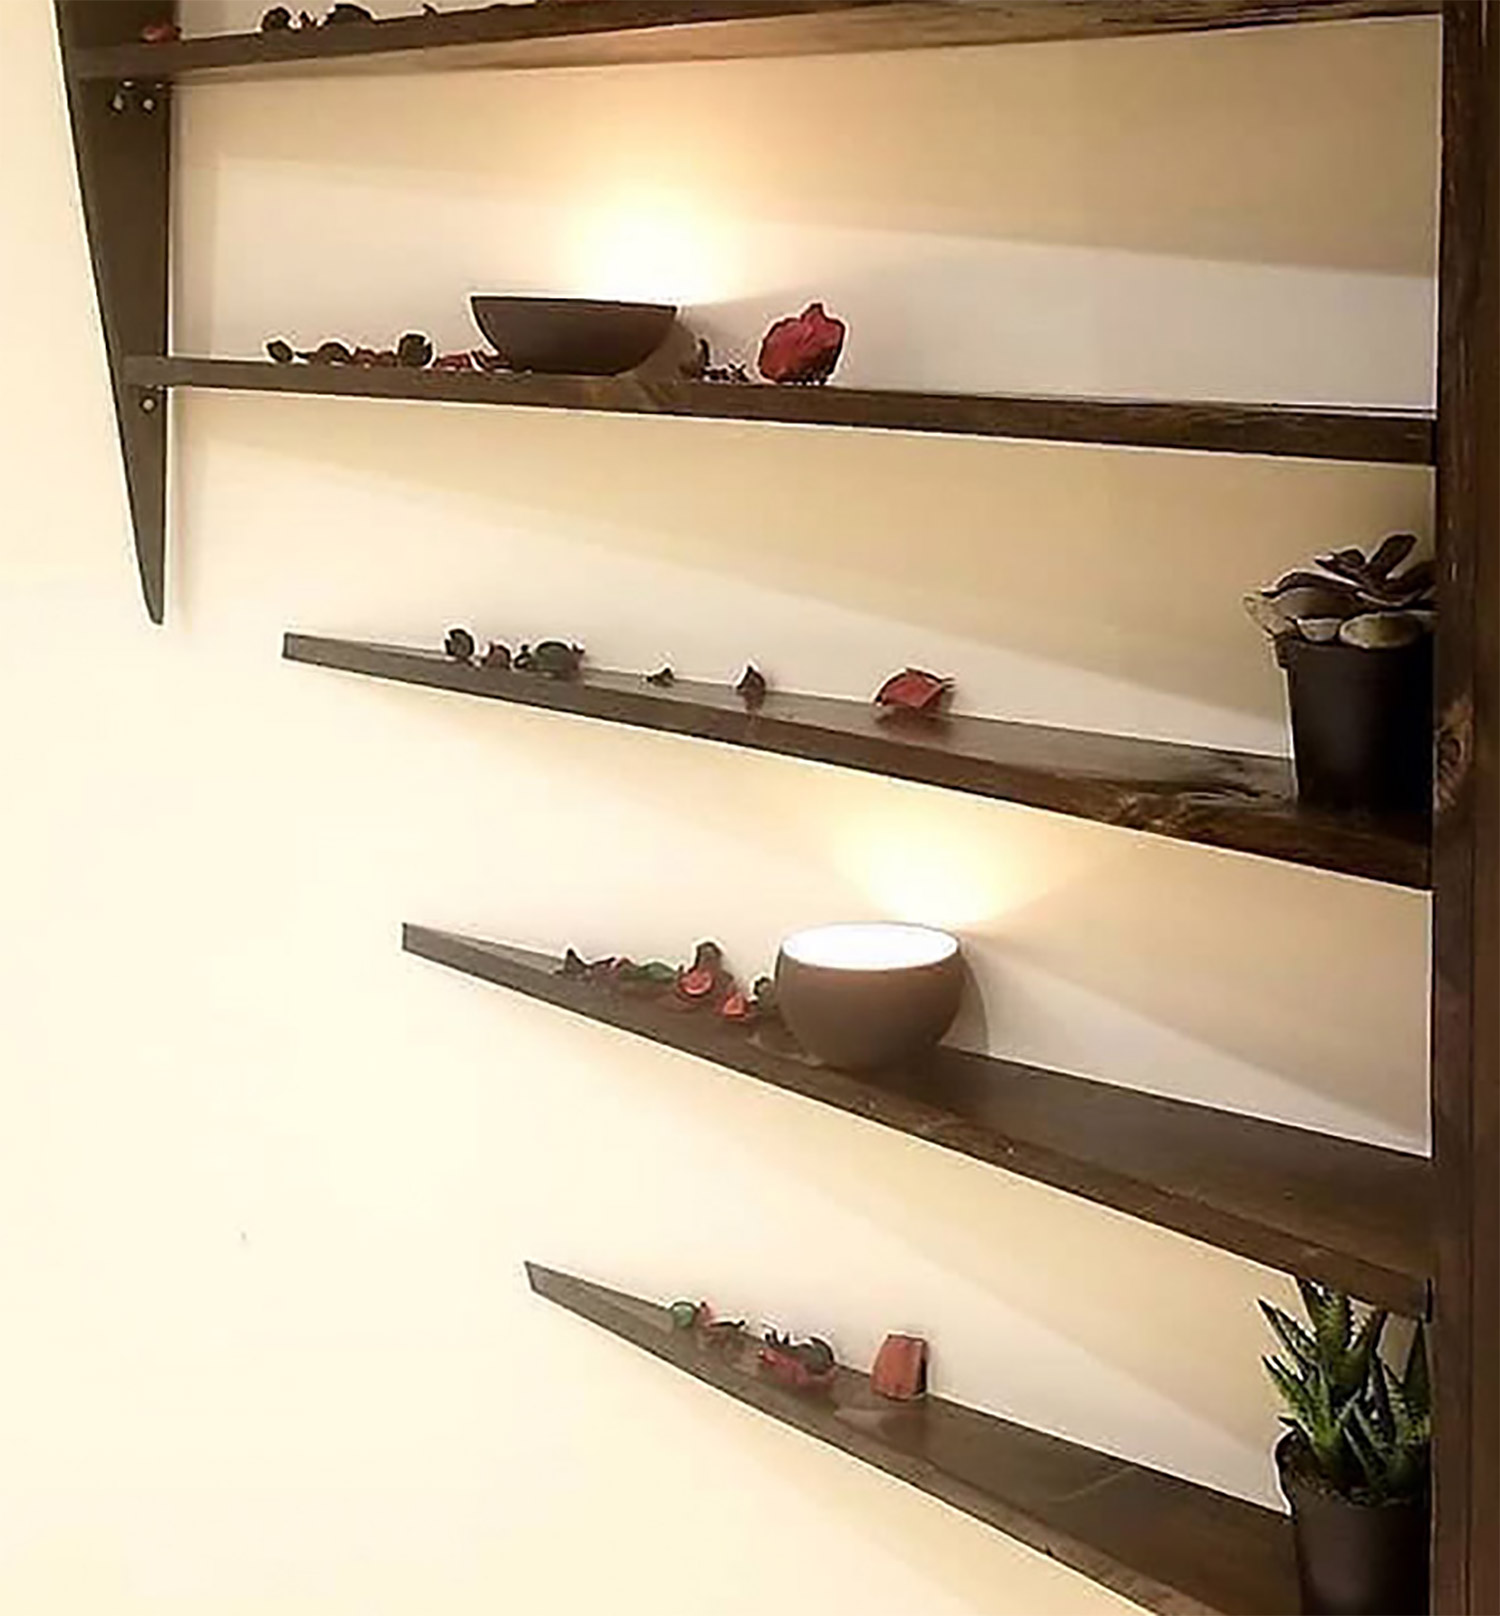 Closed view of brown-colored shelf Disappearing Into The Wall Bookshelf with some succulents